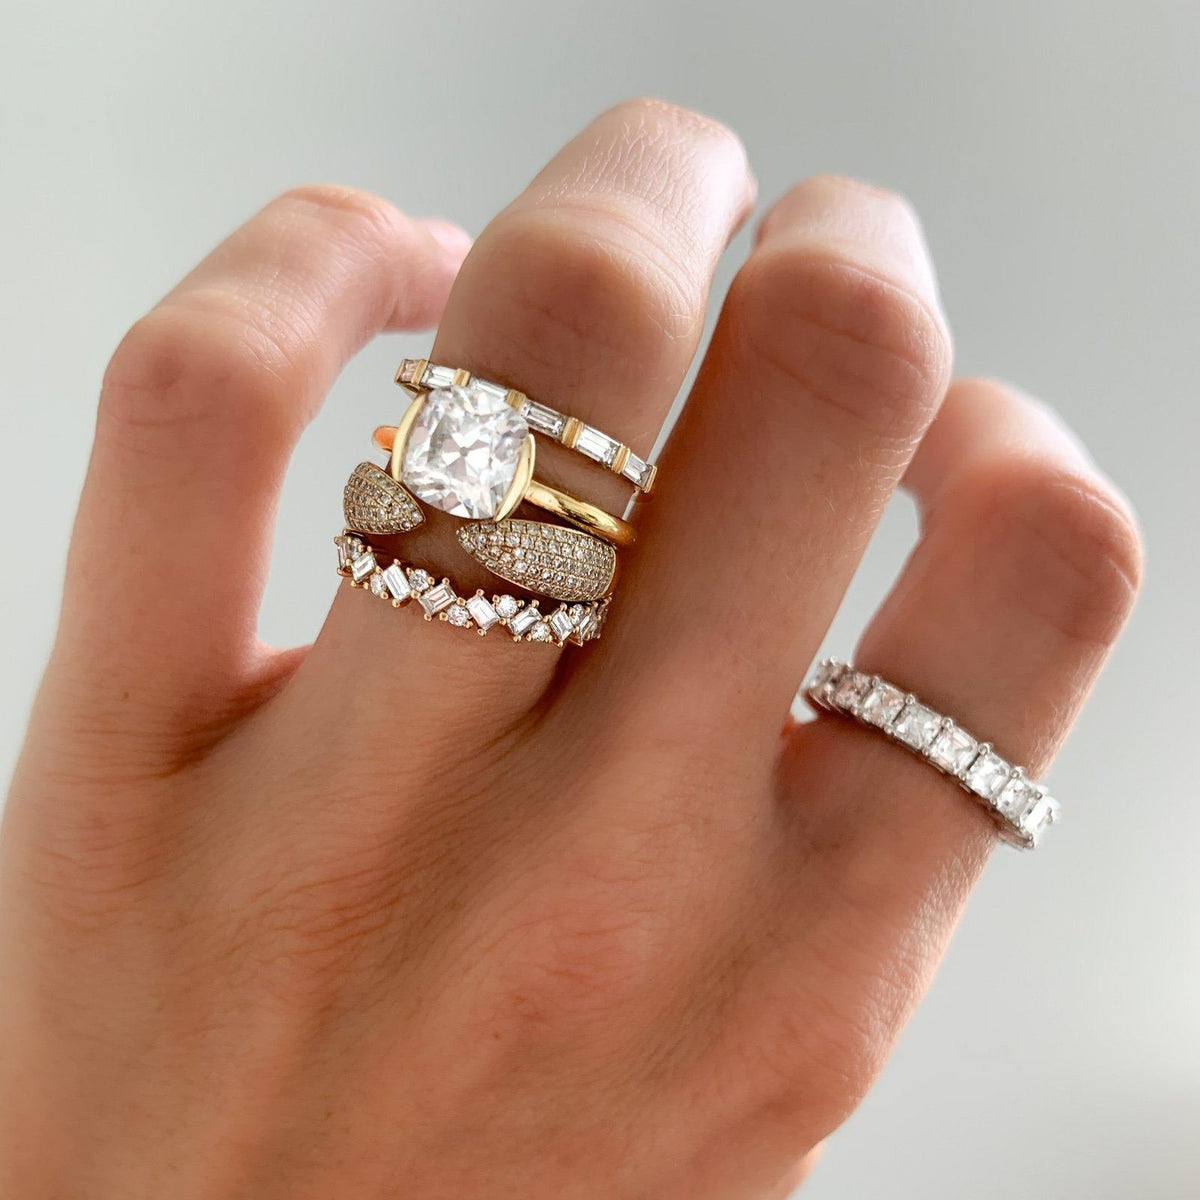 Baguette Diamond Medley Stacker by Good Stone available in Gold and Platinum